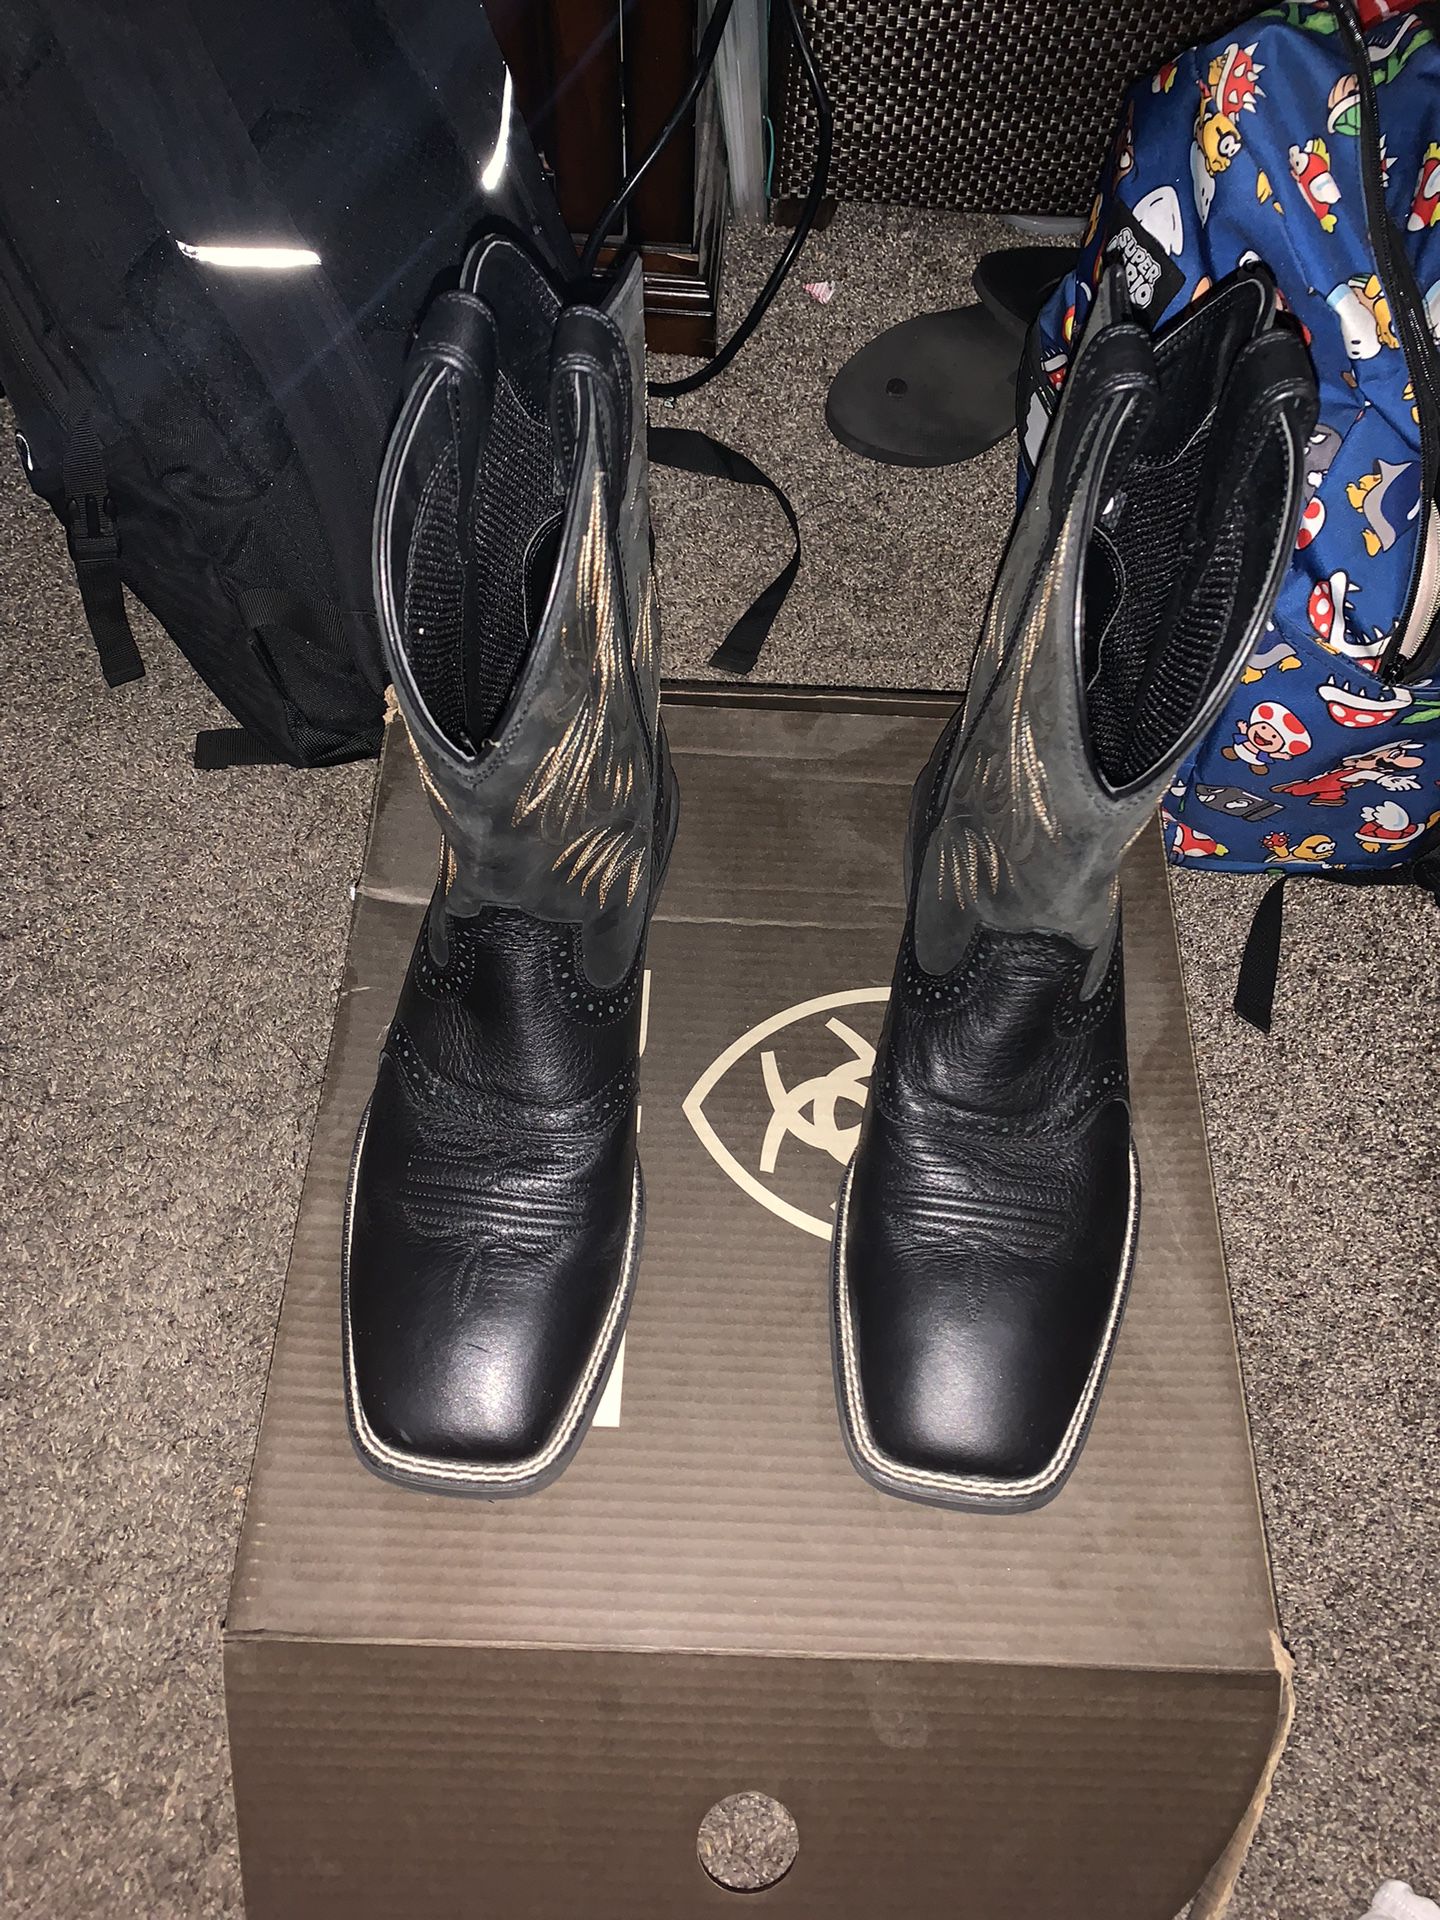 ARIAT BOOTS, FROM BOOT BARN for Sale in Temecula, CA - OfferUp